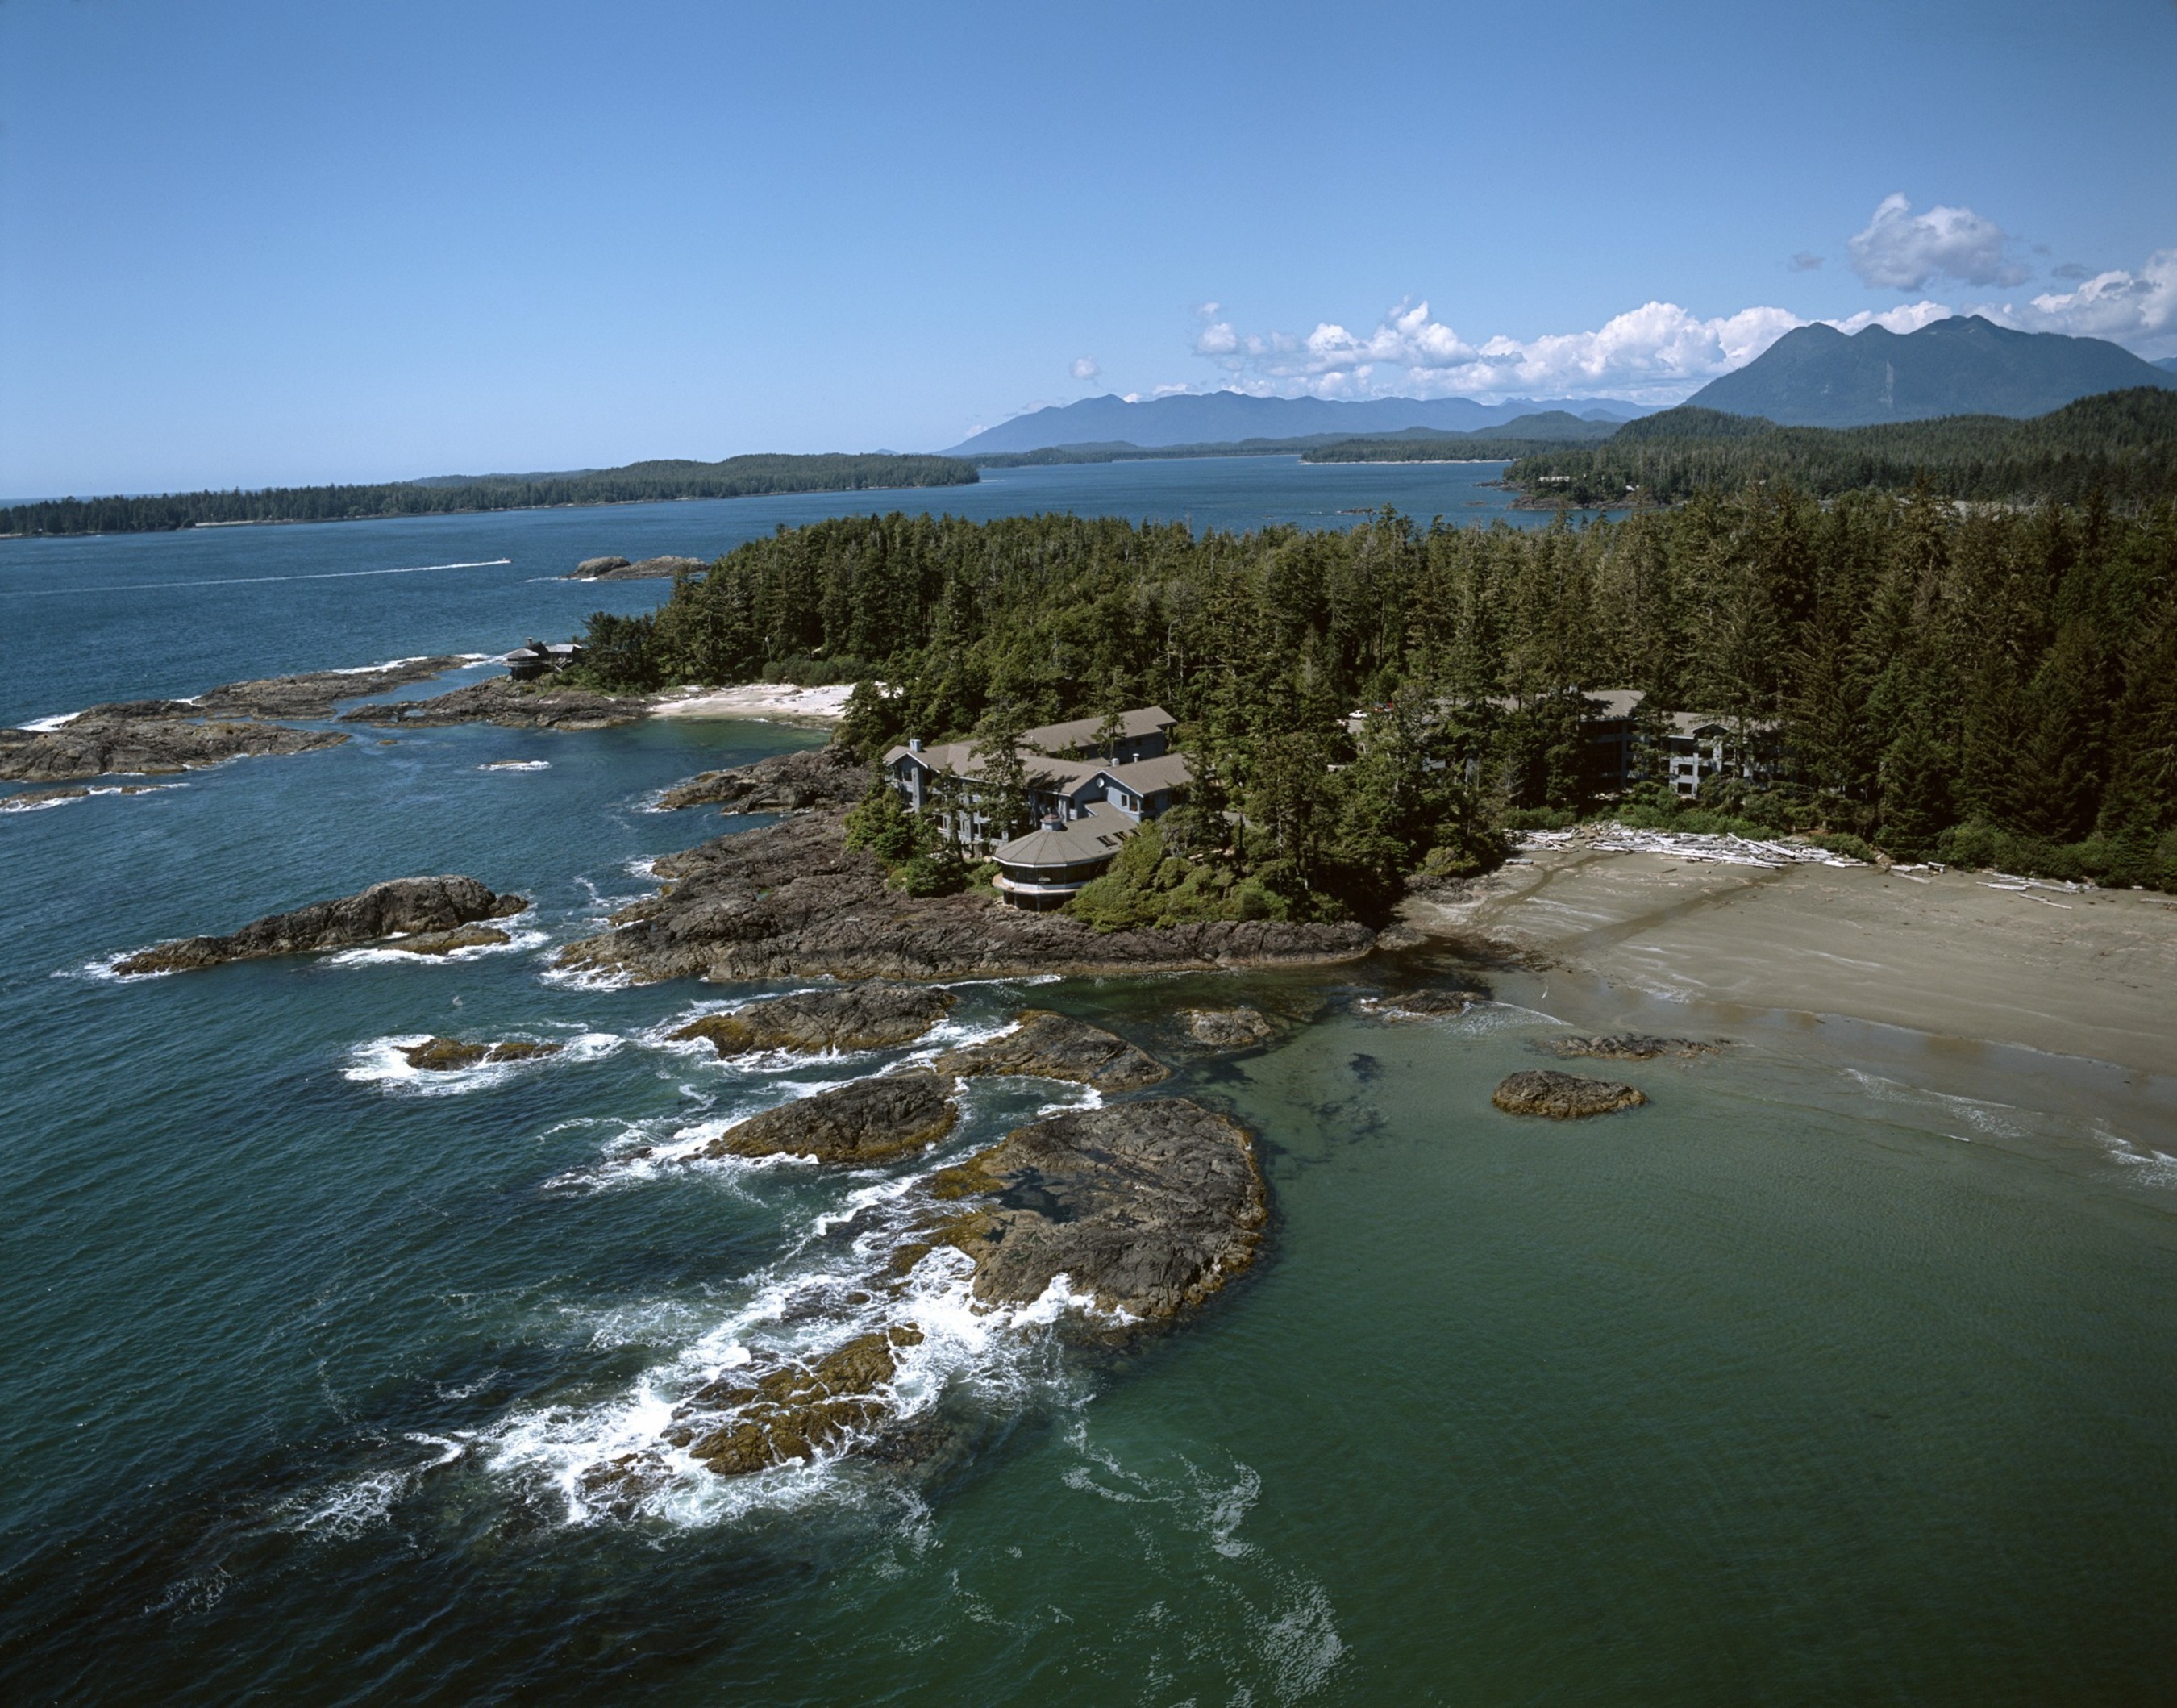 The Wickaninnish Inn (www.wickinn.com), a member of Relais & Chateaux, was named a Best Hotel, Canada, and earned a Gold badge in U.S. News & World Report's Best Hotels of 2015. Situated in Tofino, on Vancouver Island's rugged west coast, and surrounded by a temperate old growth forest, the Wickaninnish Inn is a year-round destination for surfers, kayakers, outdoor enthusiasts, spa seekers, and romantic travelers...